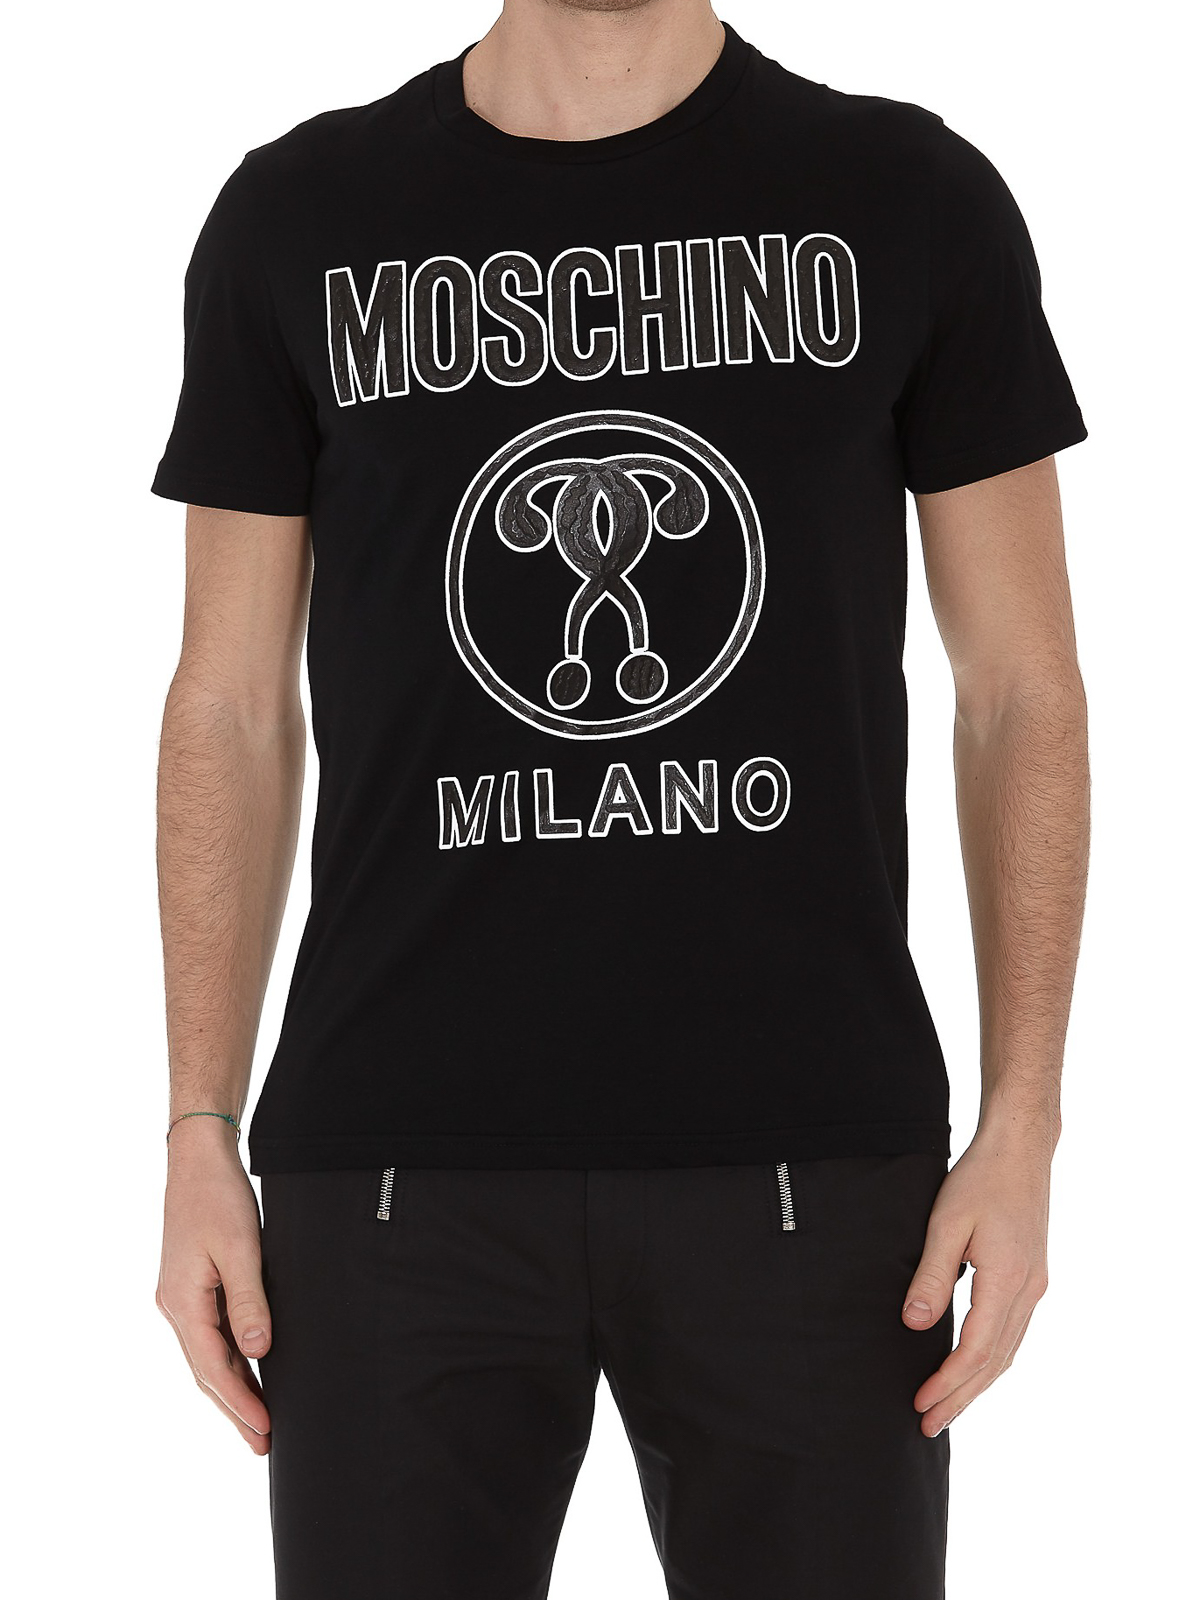 moschino patent question mark t shirt